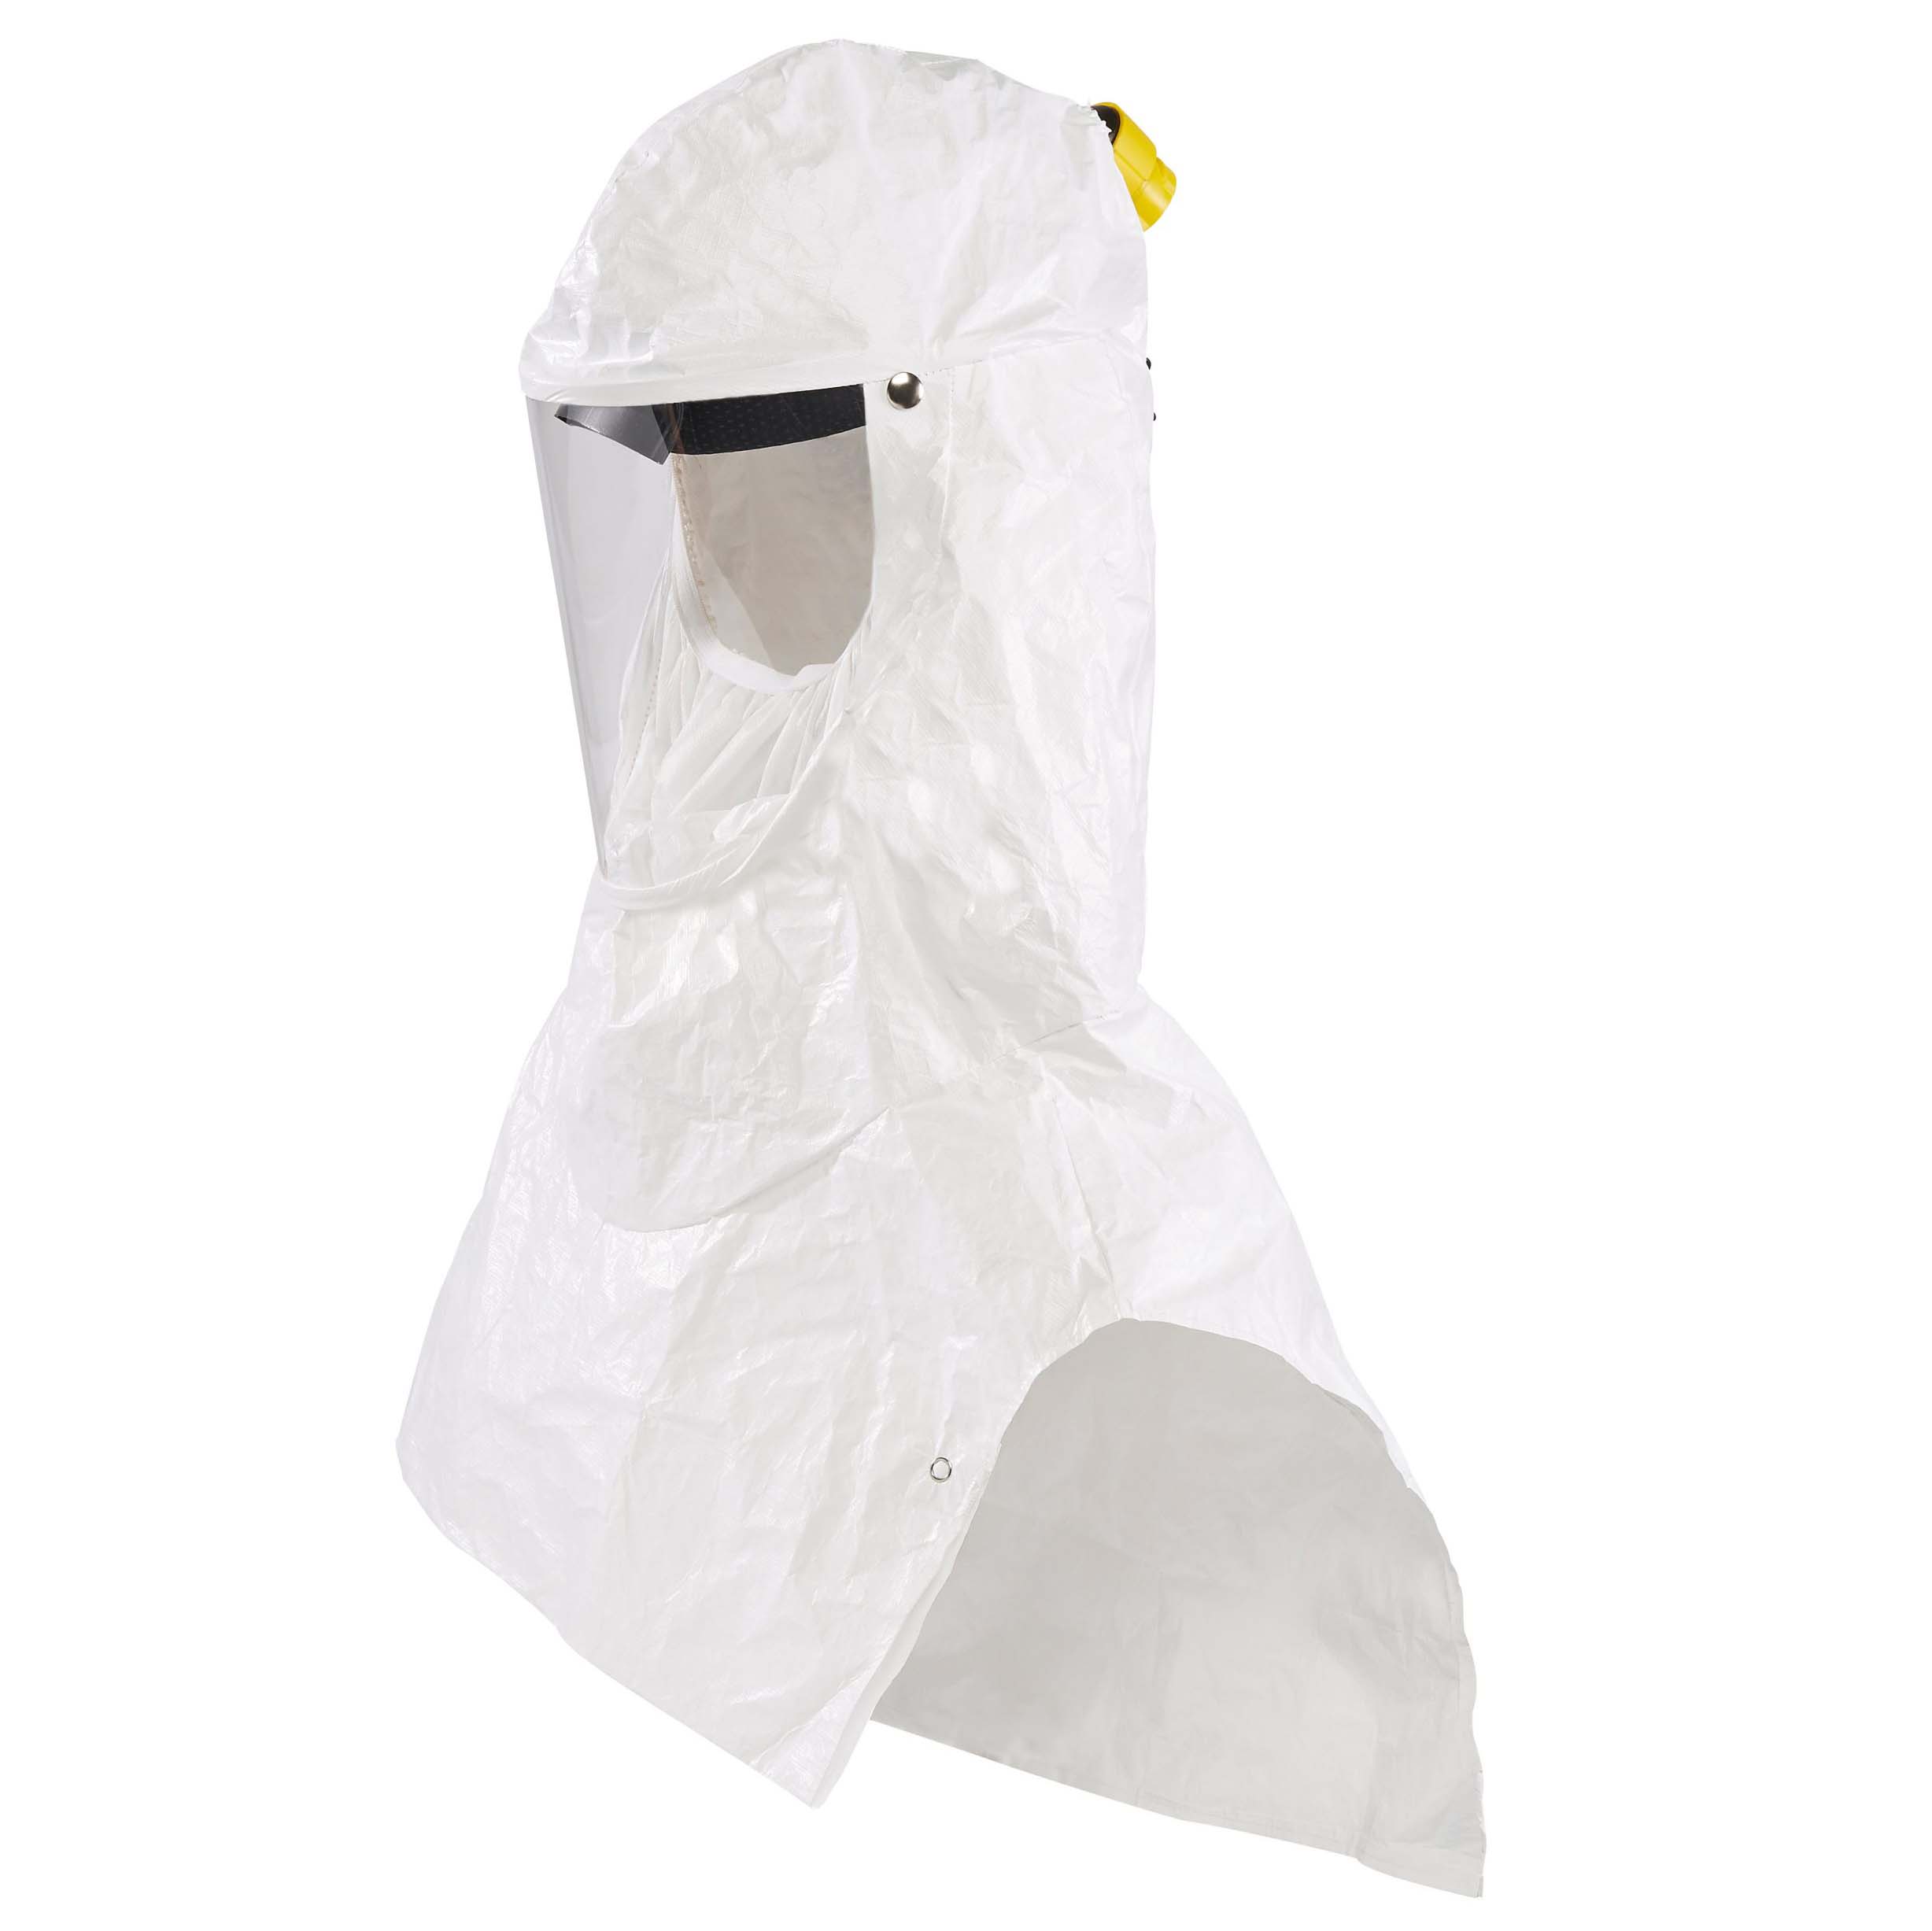 White protective head covering